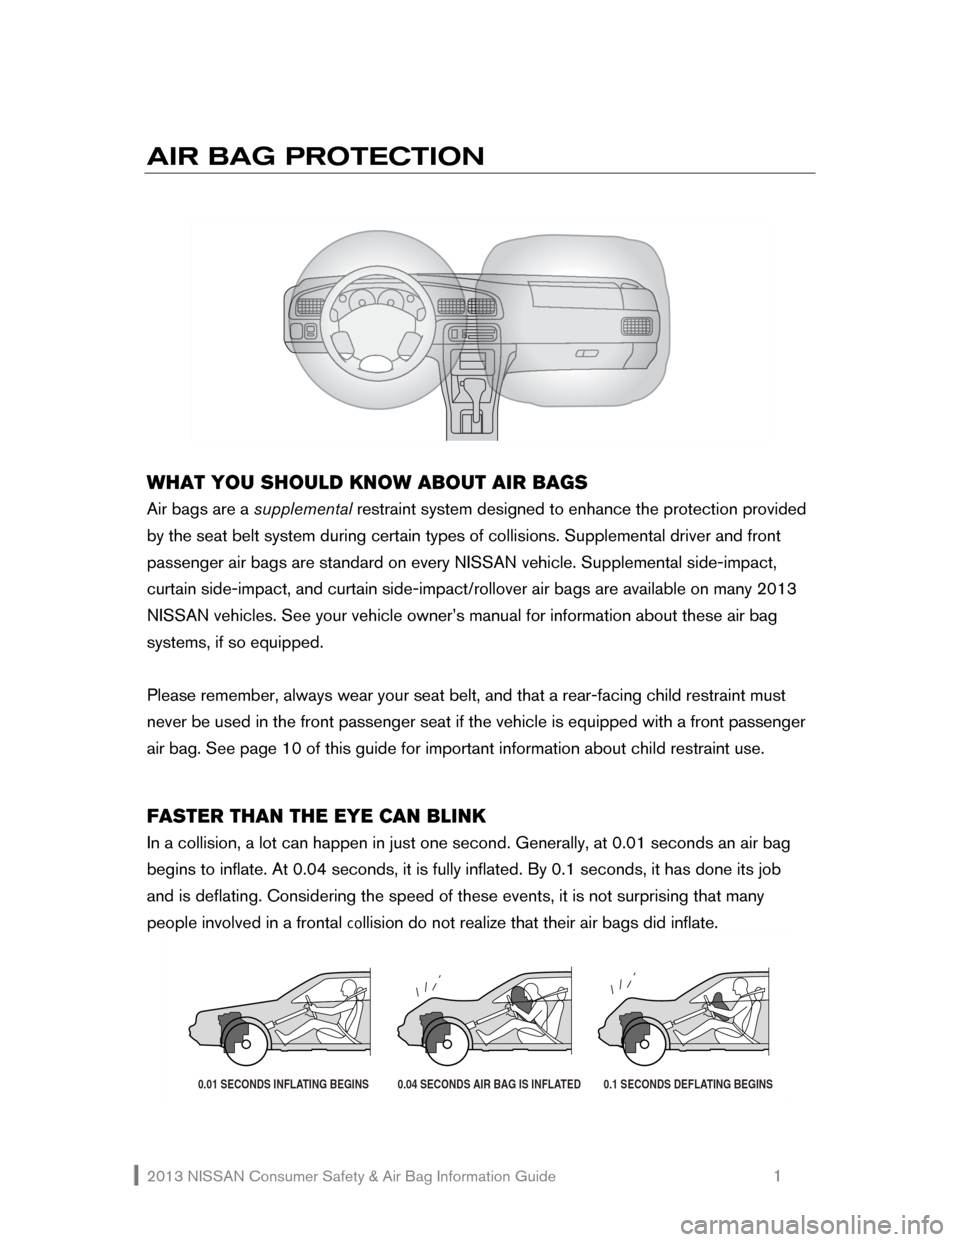 NISSAN JUKE 2013 F15 / 1.G Consumer Safety Air Bag Information Guide 2013 NISSAN Consumer Safety & Air Bag Information Guide                                                   1 
AIR BAG PROTECTION 
    
 
 
WHAT YOU SHOULD KNOW ABOUT AIR BAGS 
Air bags are a supplement